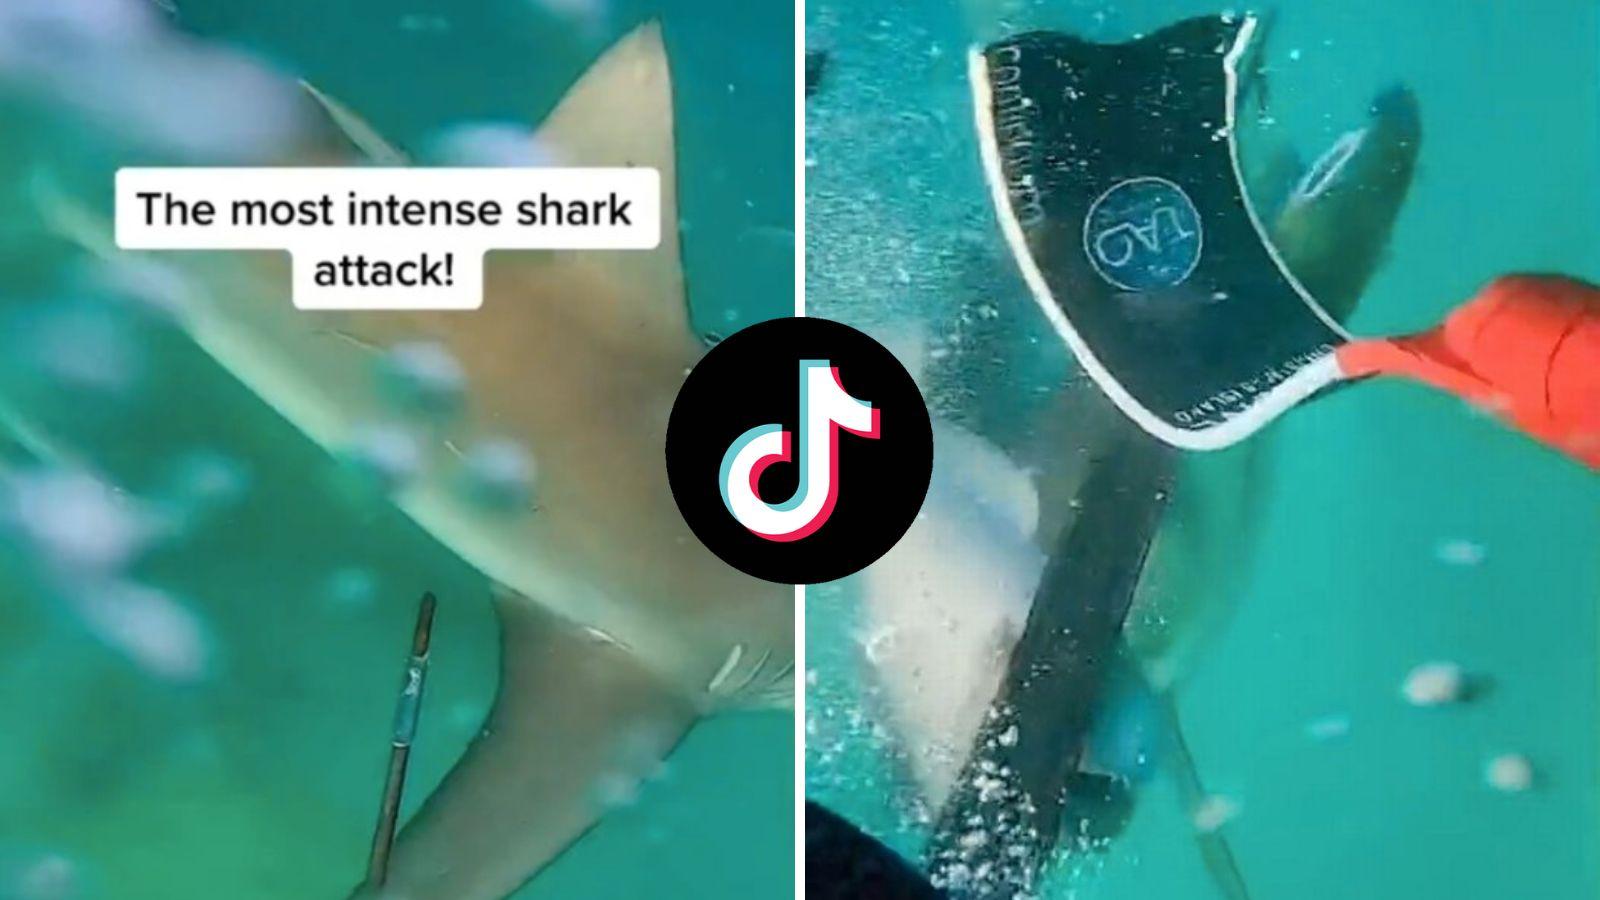 Terrified divers kick shark in the face to escape attack in viral video